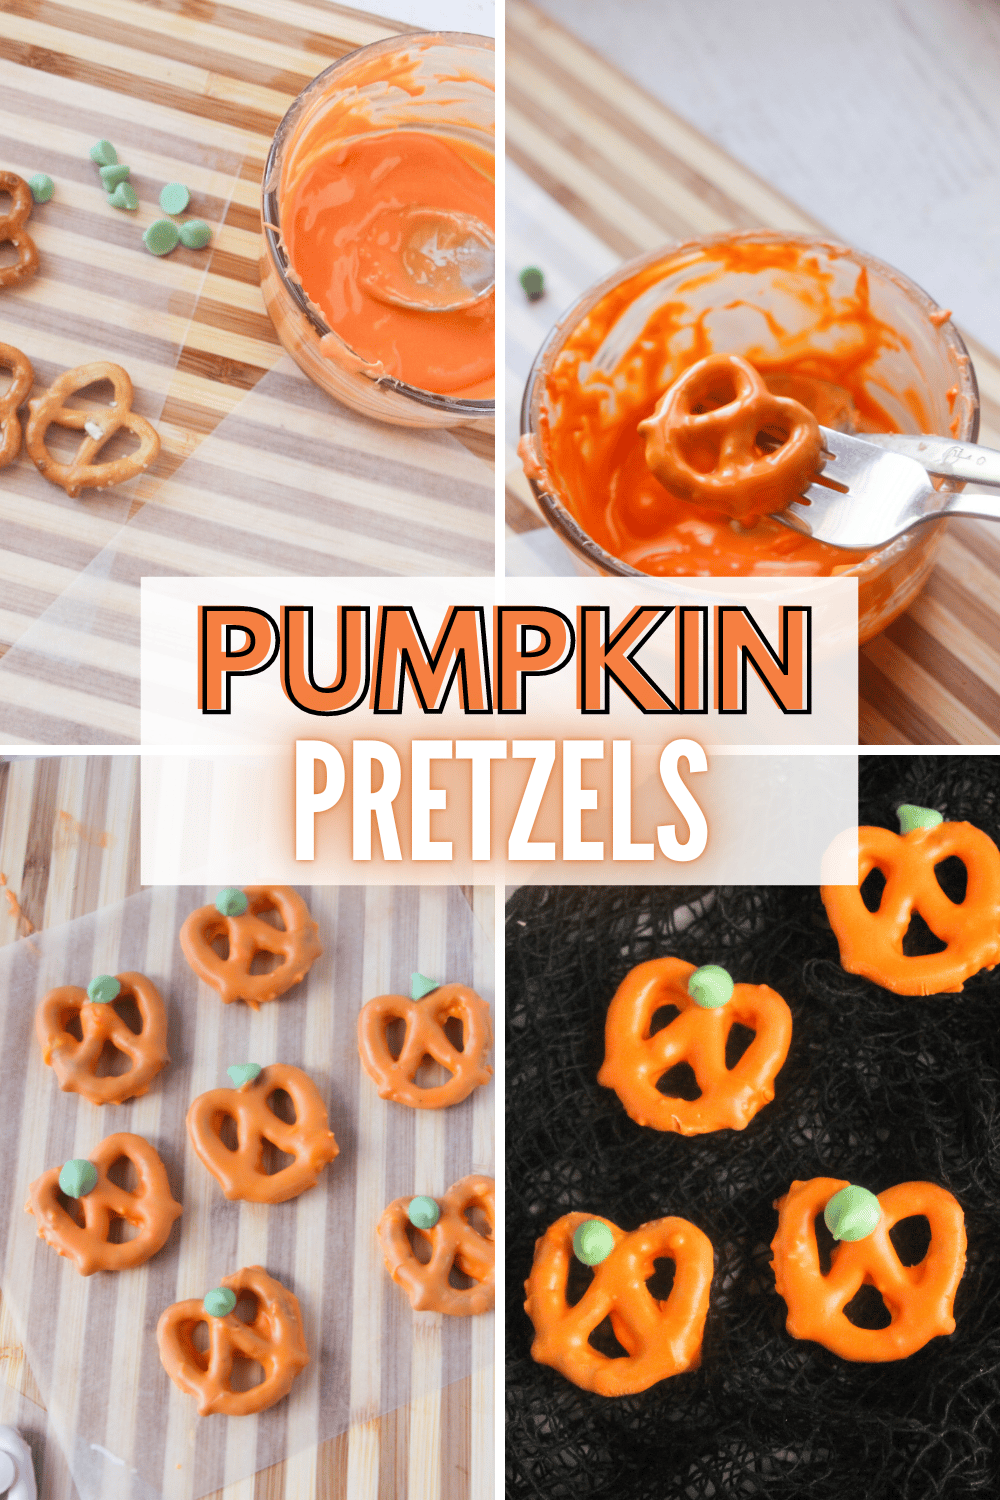 Pumpkin Pretzels are the perfect snack! They're crispy, and the candy coating gives a sweet crunch making this a delicious festive snack. #pumpkinpretzels #halloween #halloweensnack #festivesnack via @wondermomwannab